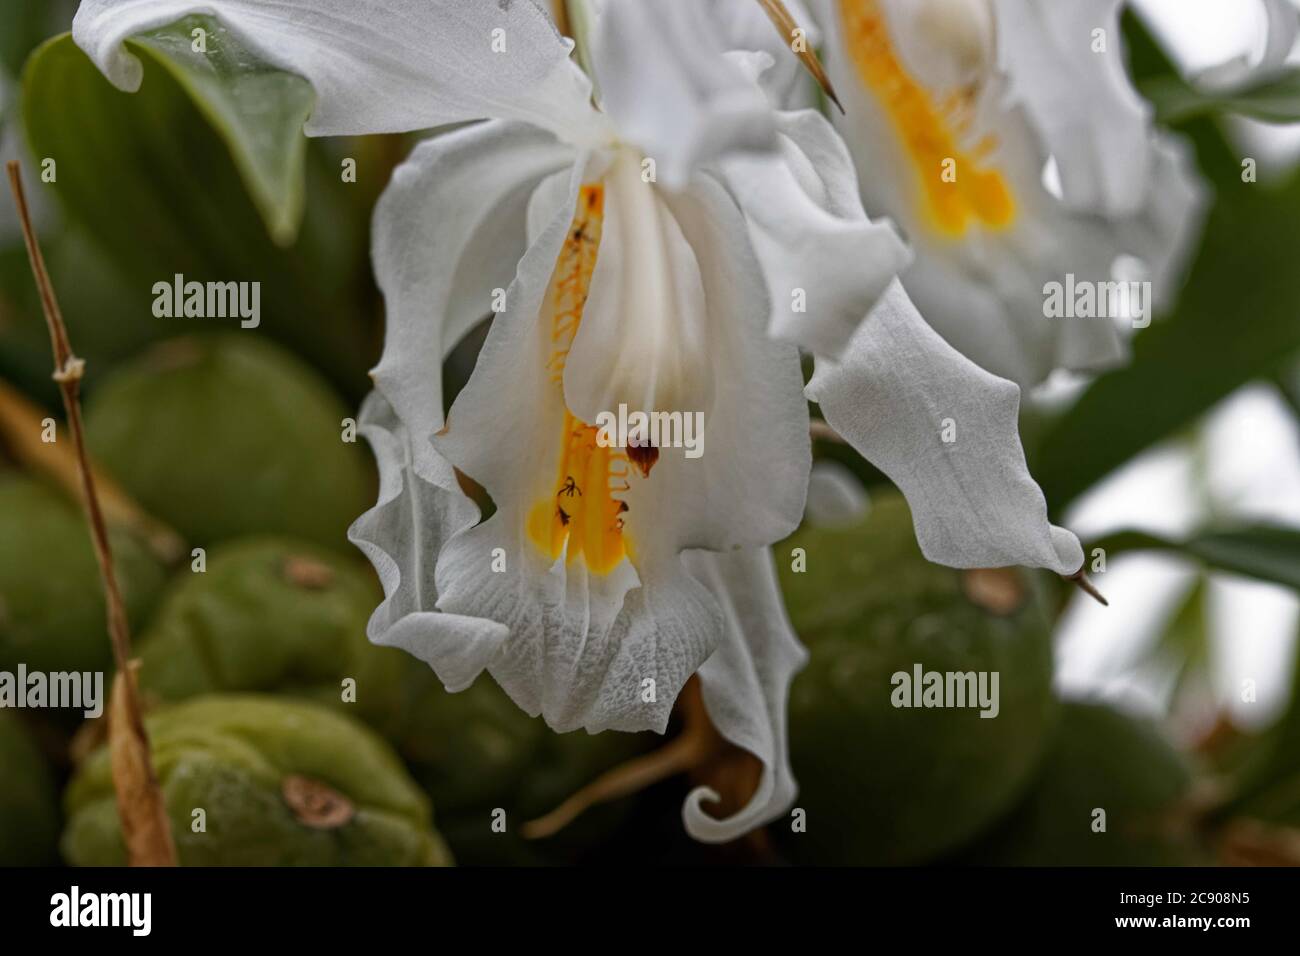 Coelogyne cristata is an epiphytic orchid that comes from cool, moist areas of the eastern Himalayas and Vietnam. Stock Photo